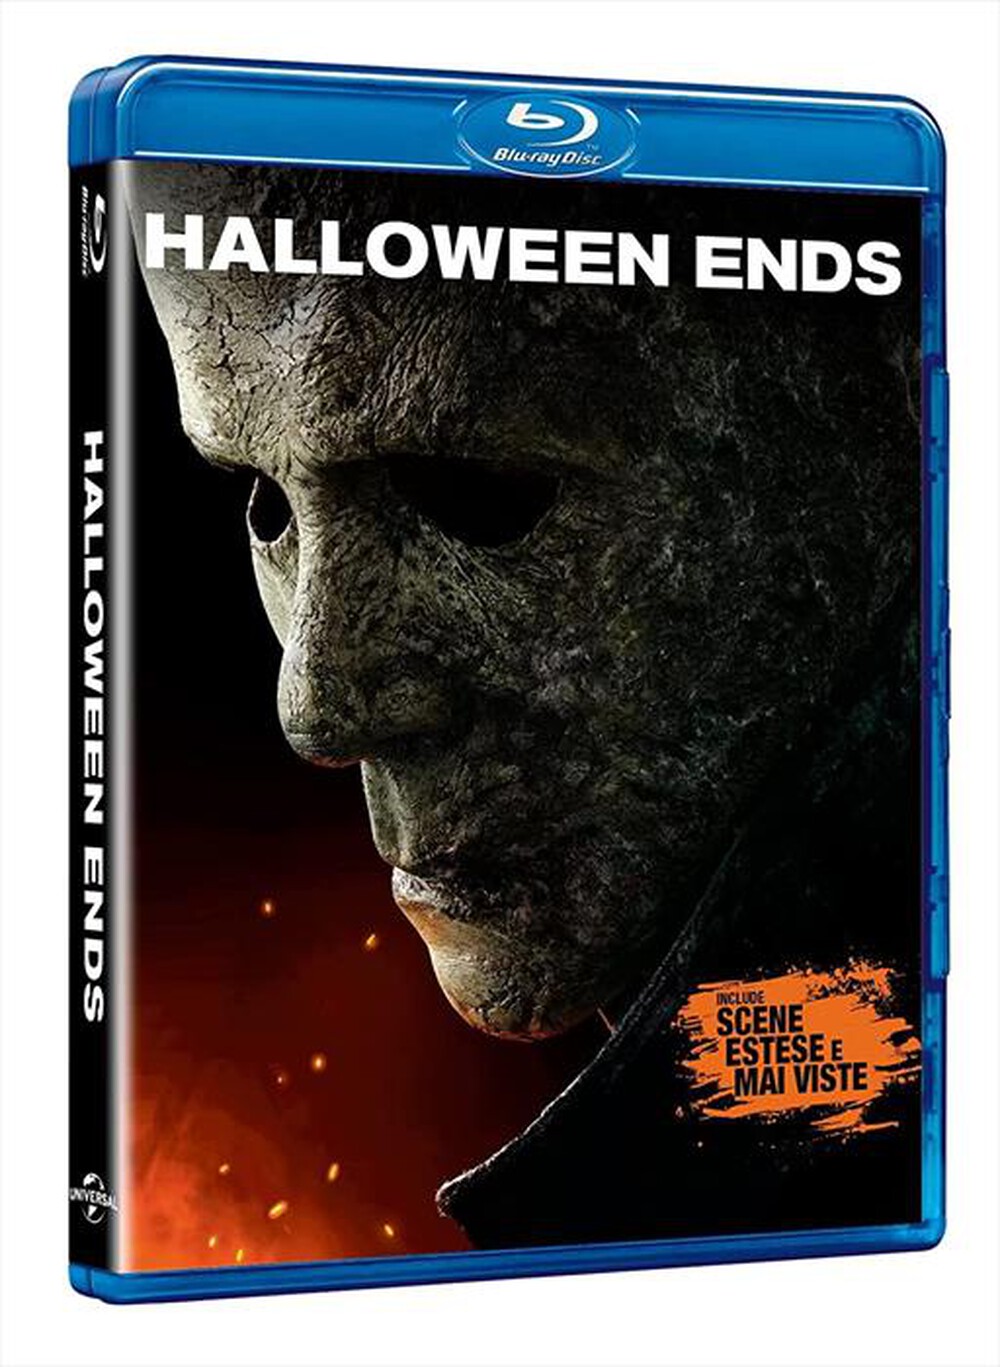 "UNIVERSAL PICTURES - Halloween Ends"